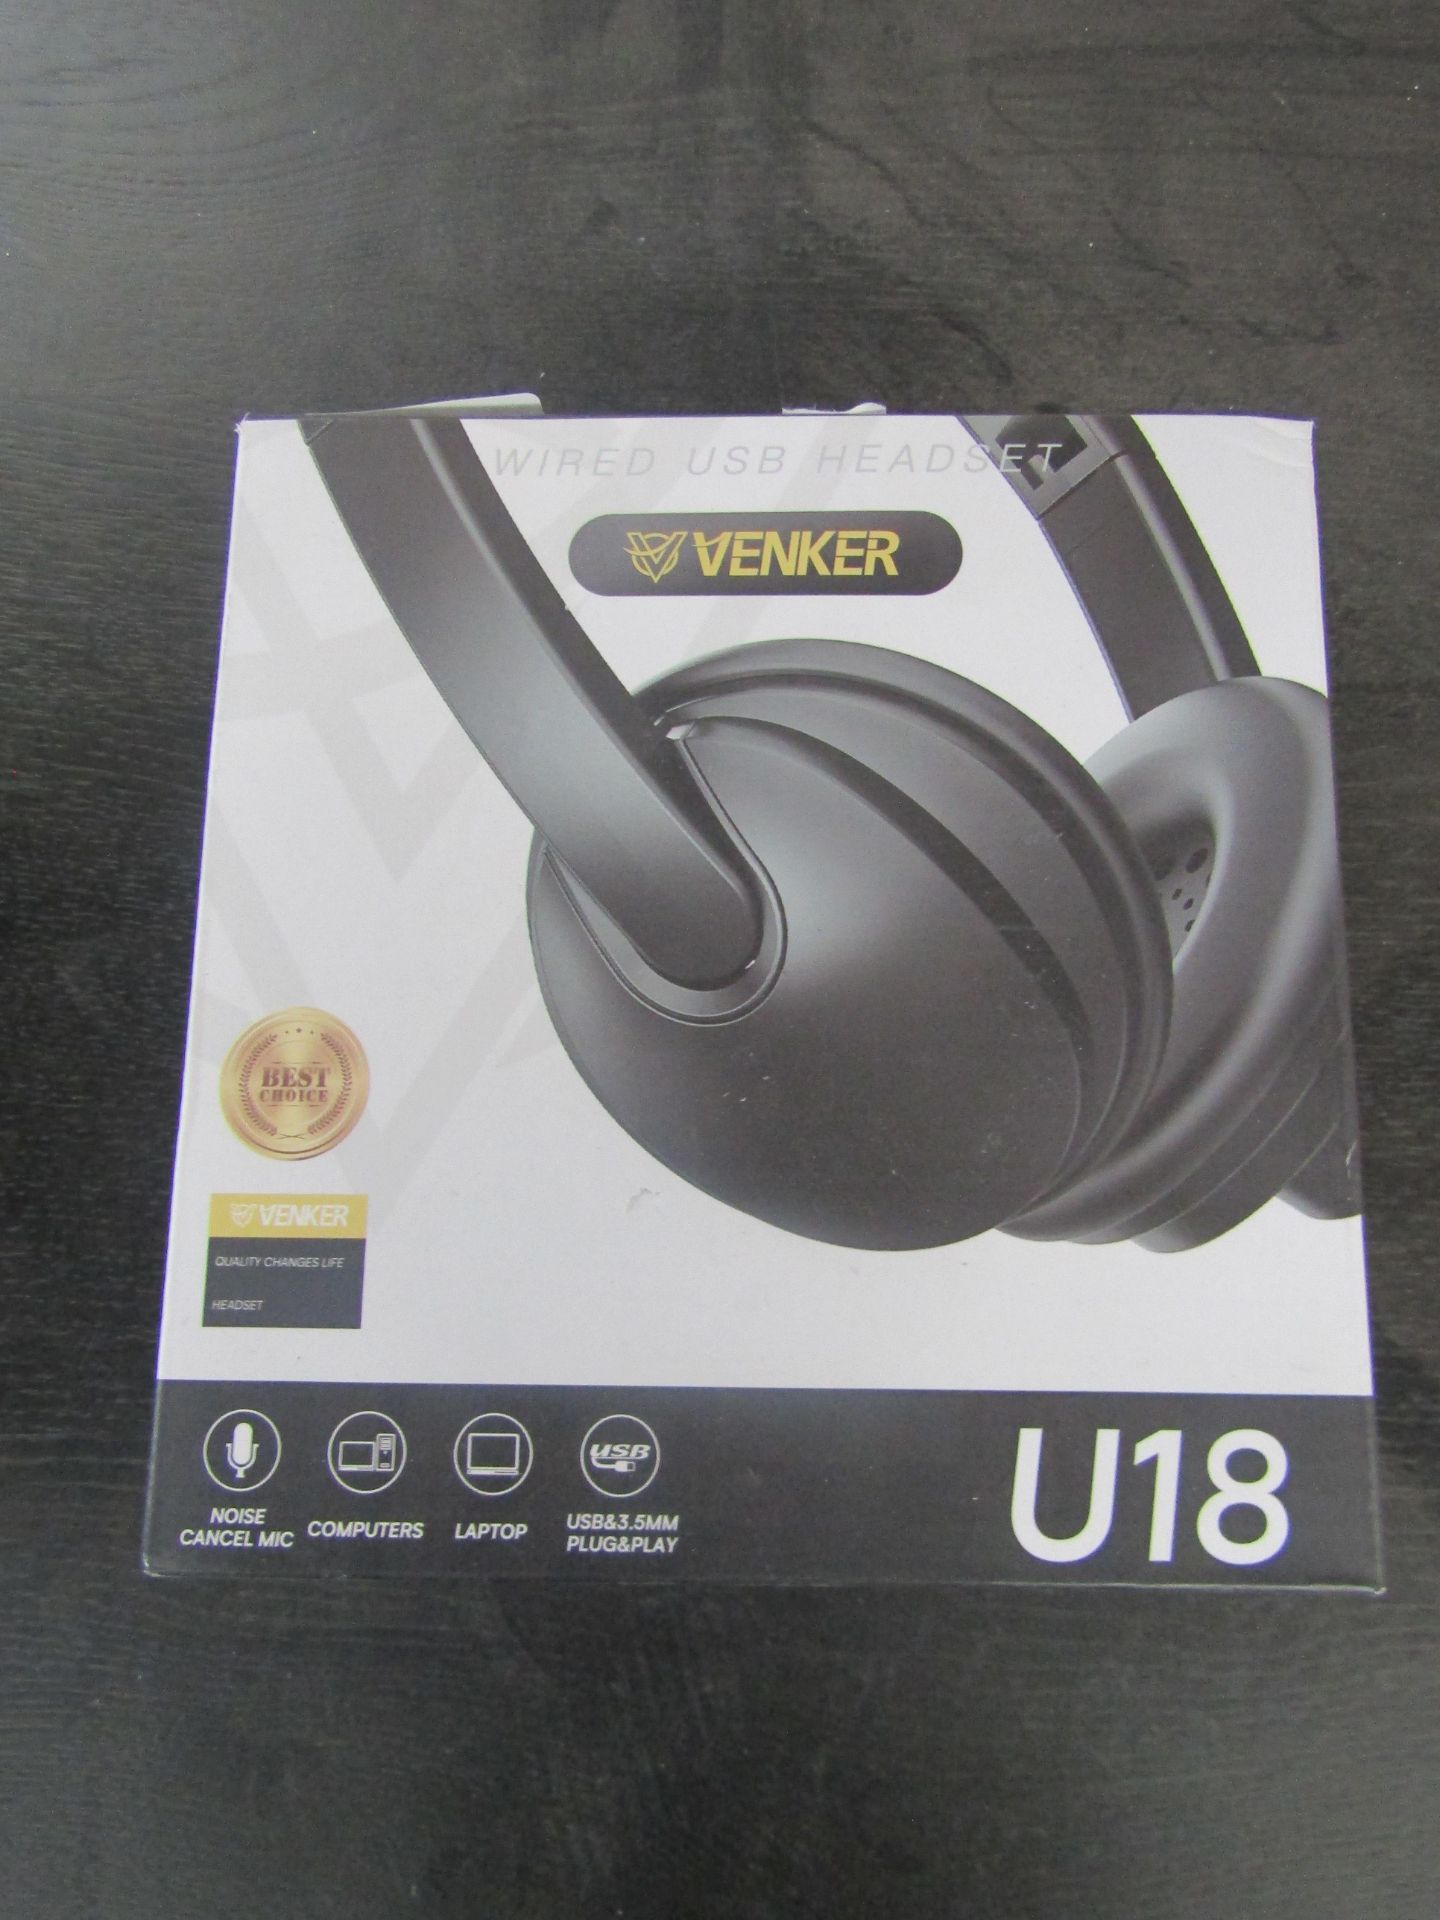 Venker Wired USB Headset U18 - Unchecked & Boxed.